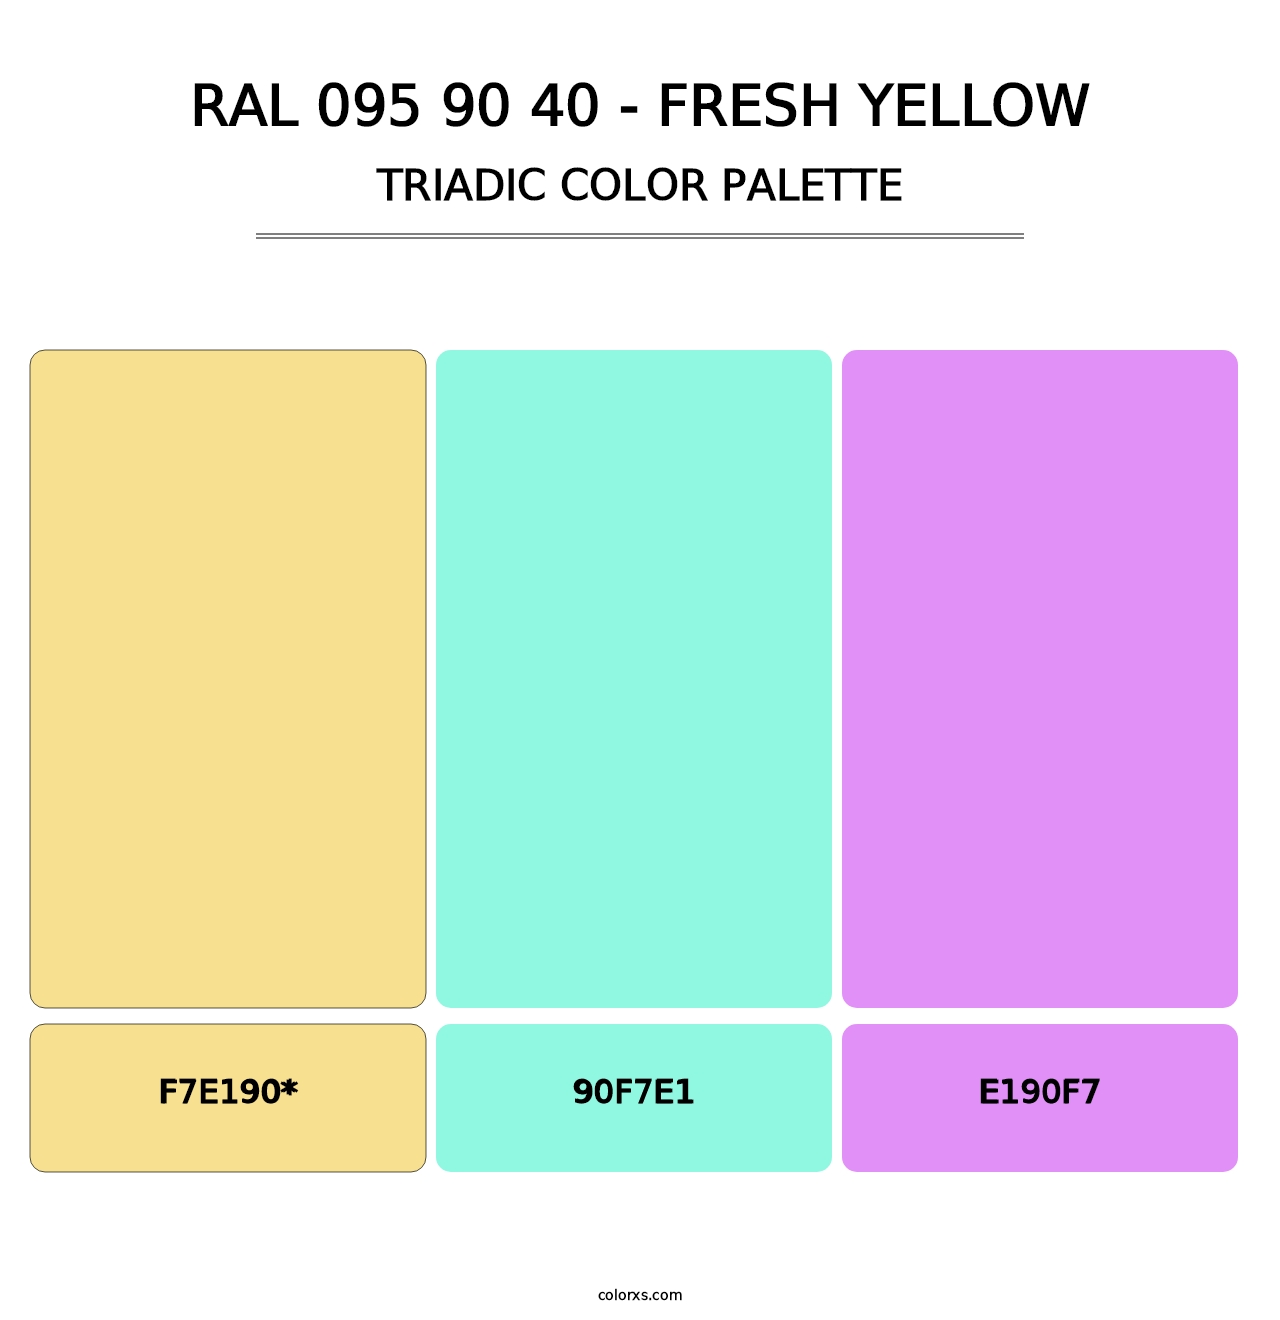 RAL 095 90 40 - Fresh Yellow - Triadic Color Palette